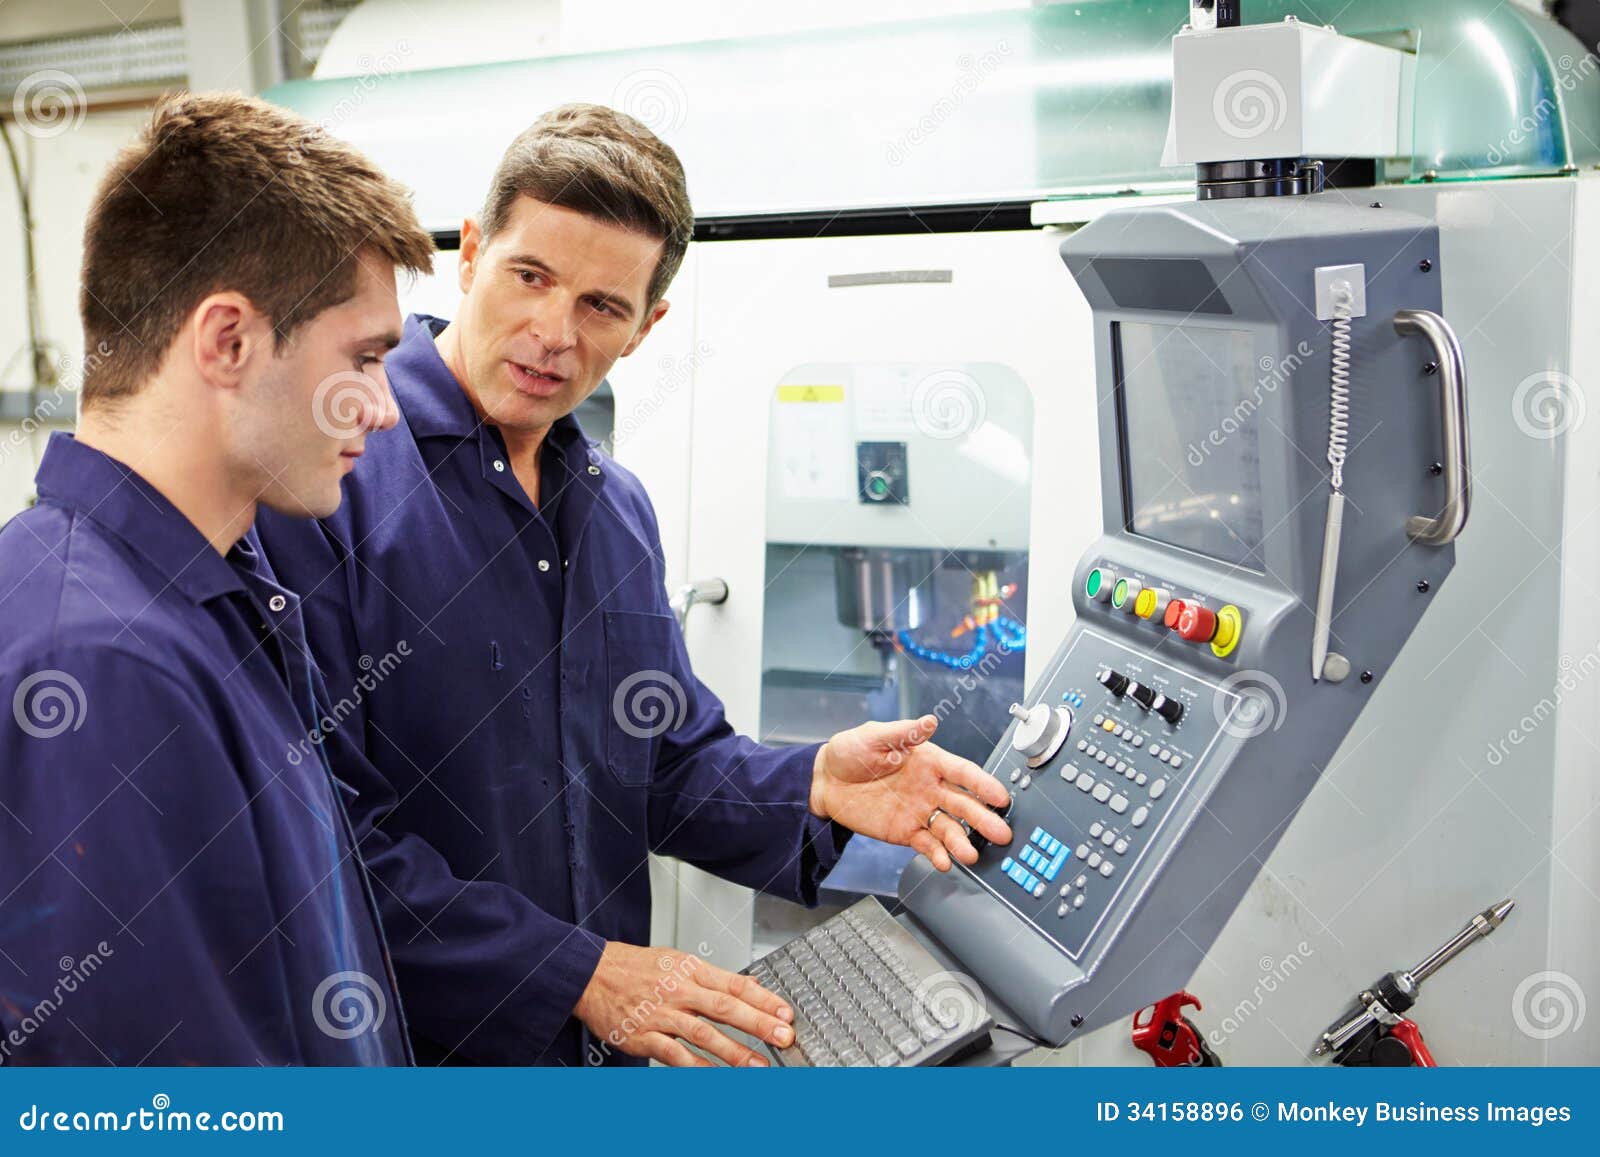 engineer and apprentice using automated milling machine